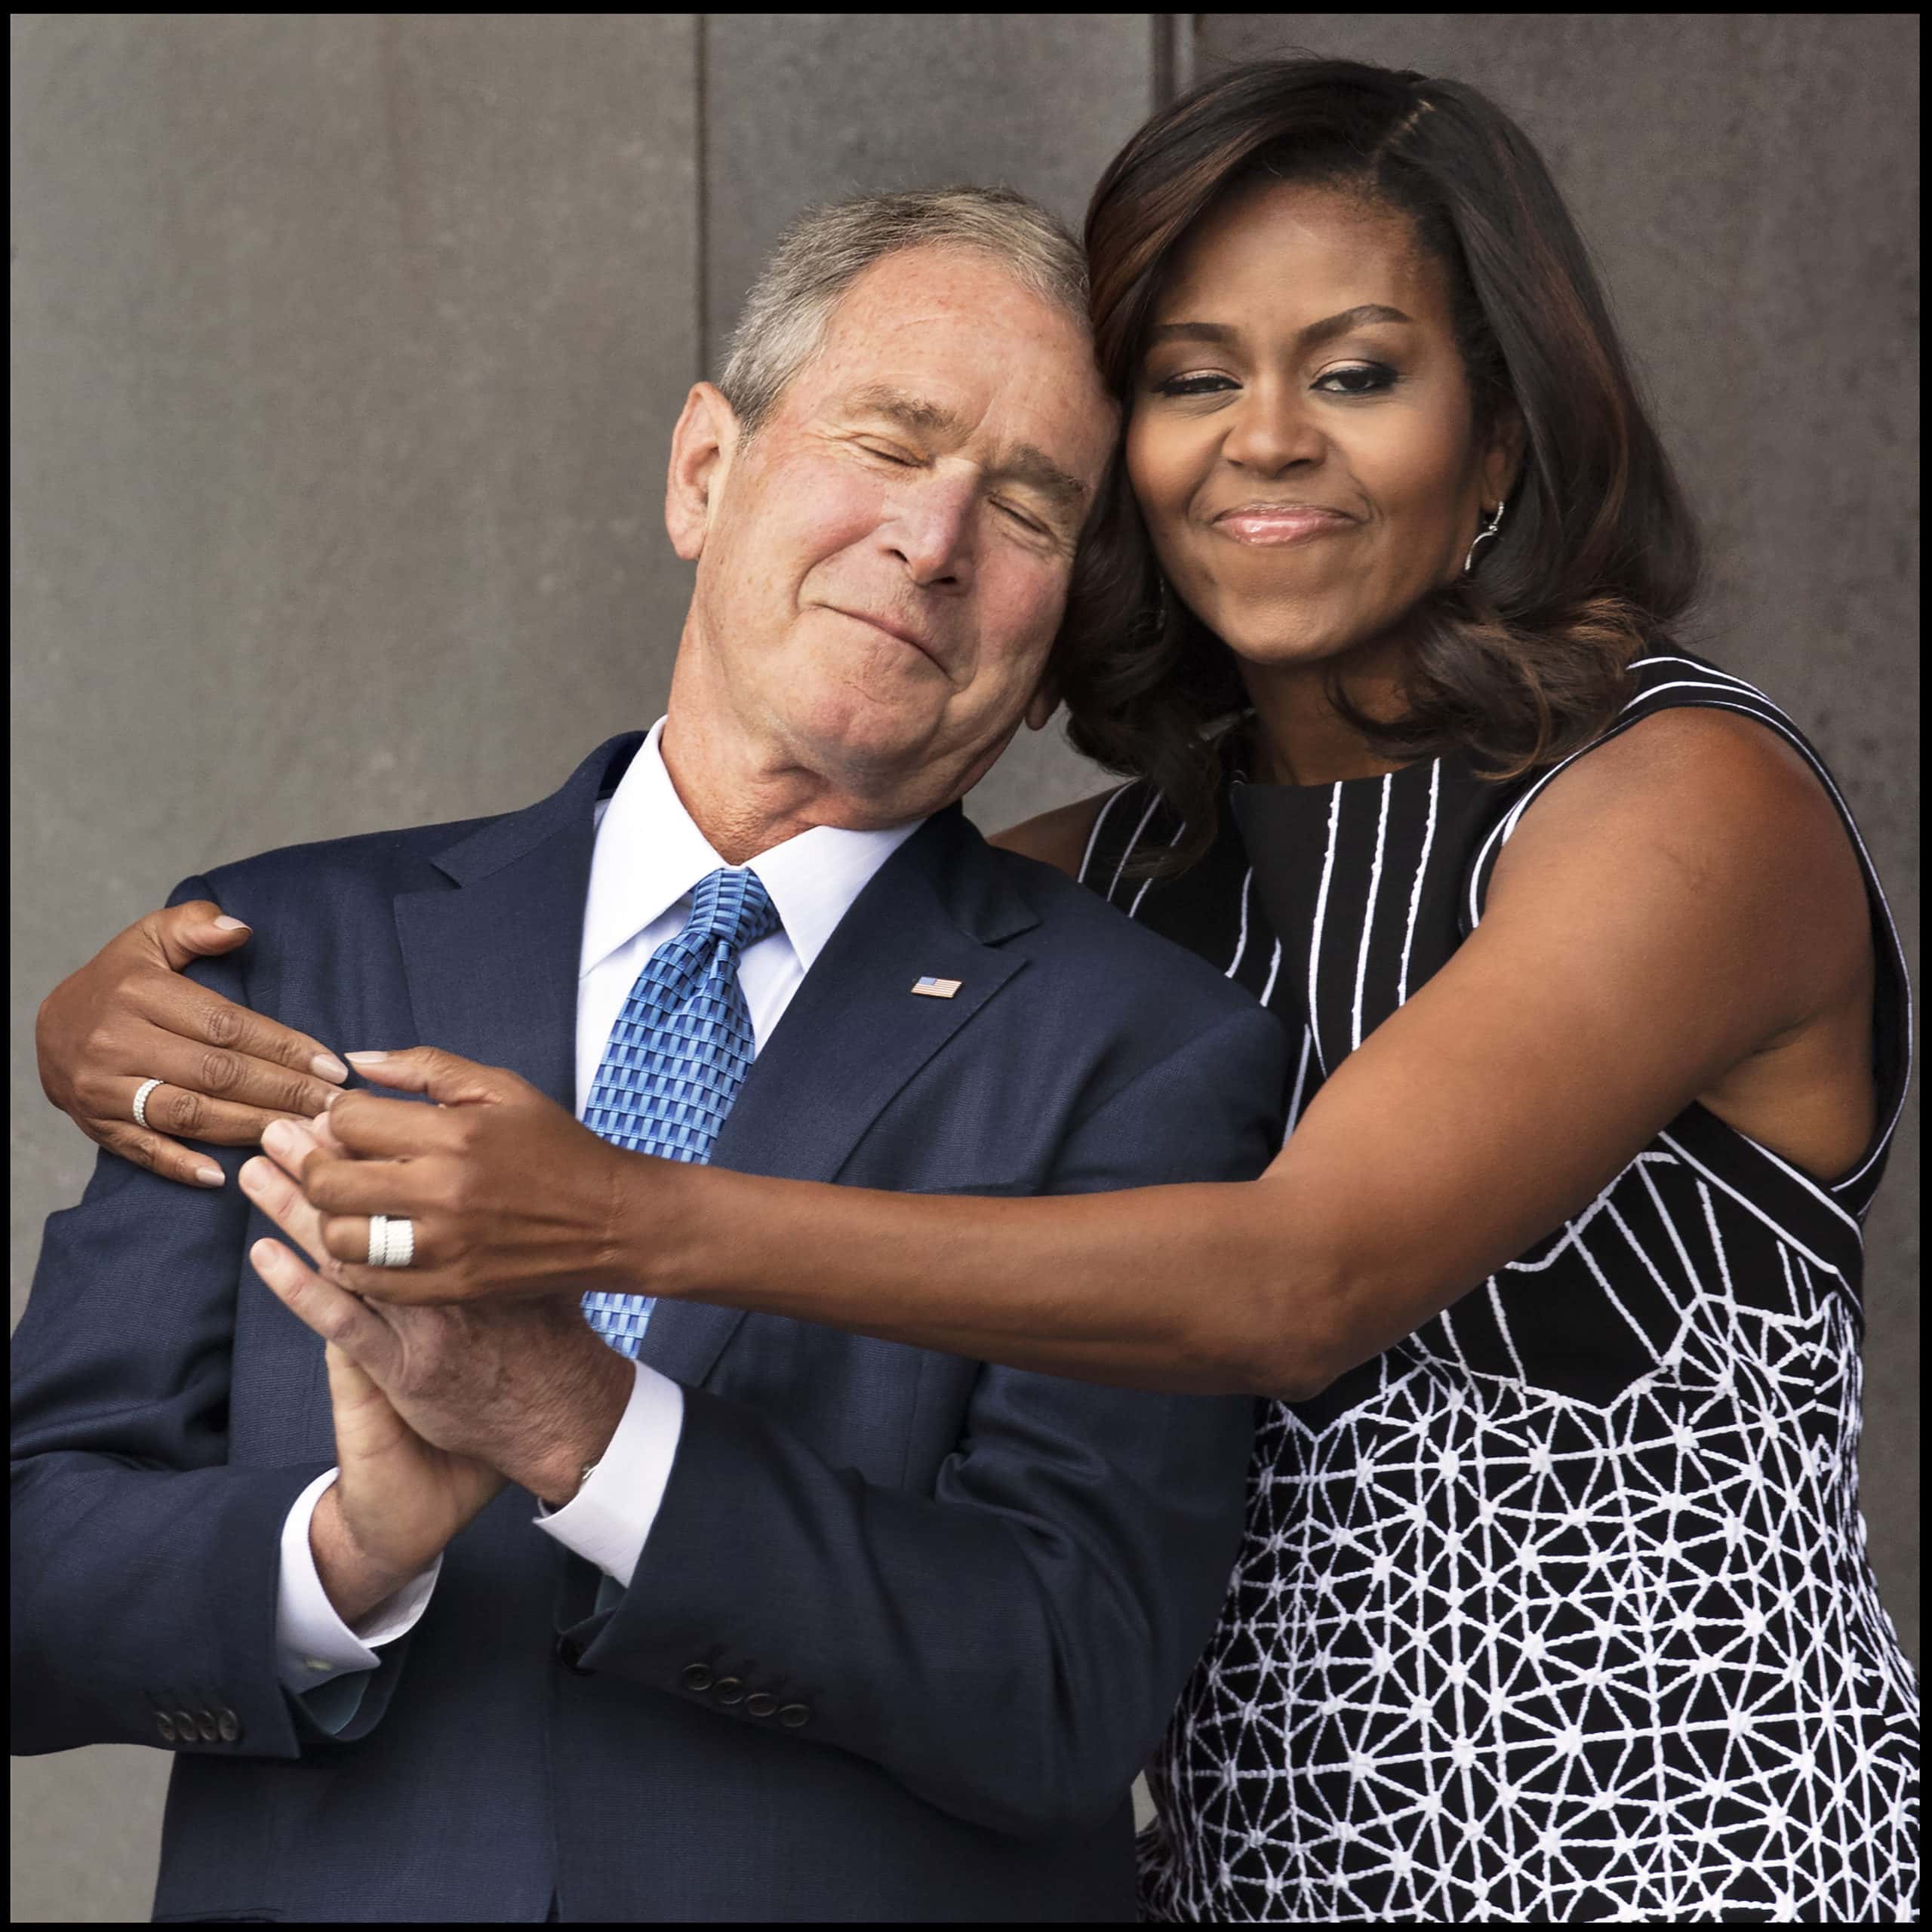 WASHINGTON -- SEPT 24: The opening of the National Museum of African American History and Culture. President and Mrs. Barack Obama, Former President and Mrs. George W. Bush, Bank of America Chairman and CEO Brian Moynihan, NMAAHC Director Lonnie Bunch, and others, September 24, 2016, Washington, D.C.  (Photos by David Hume Kennerly)